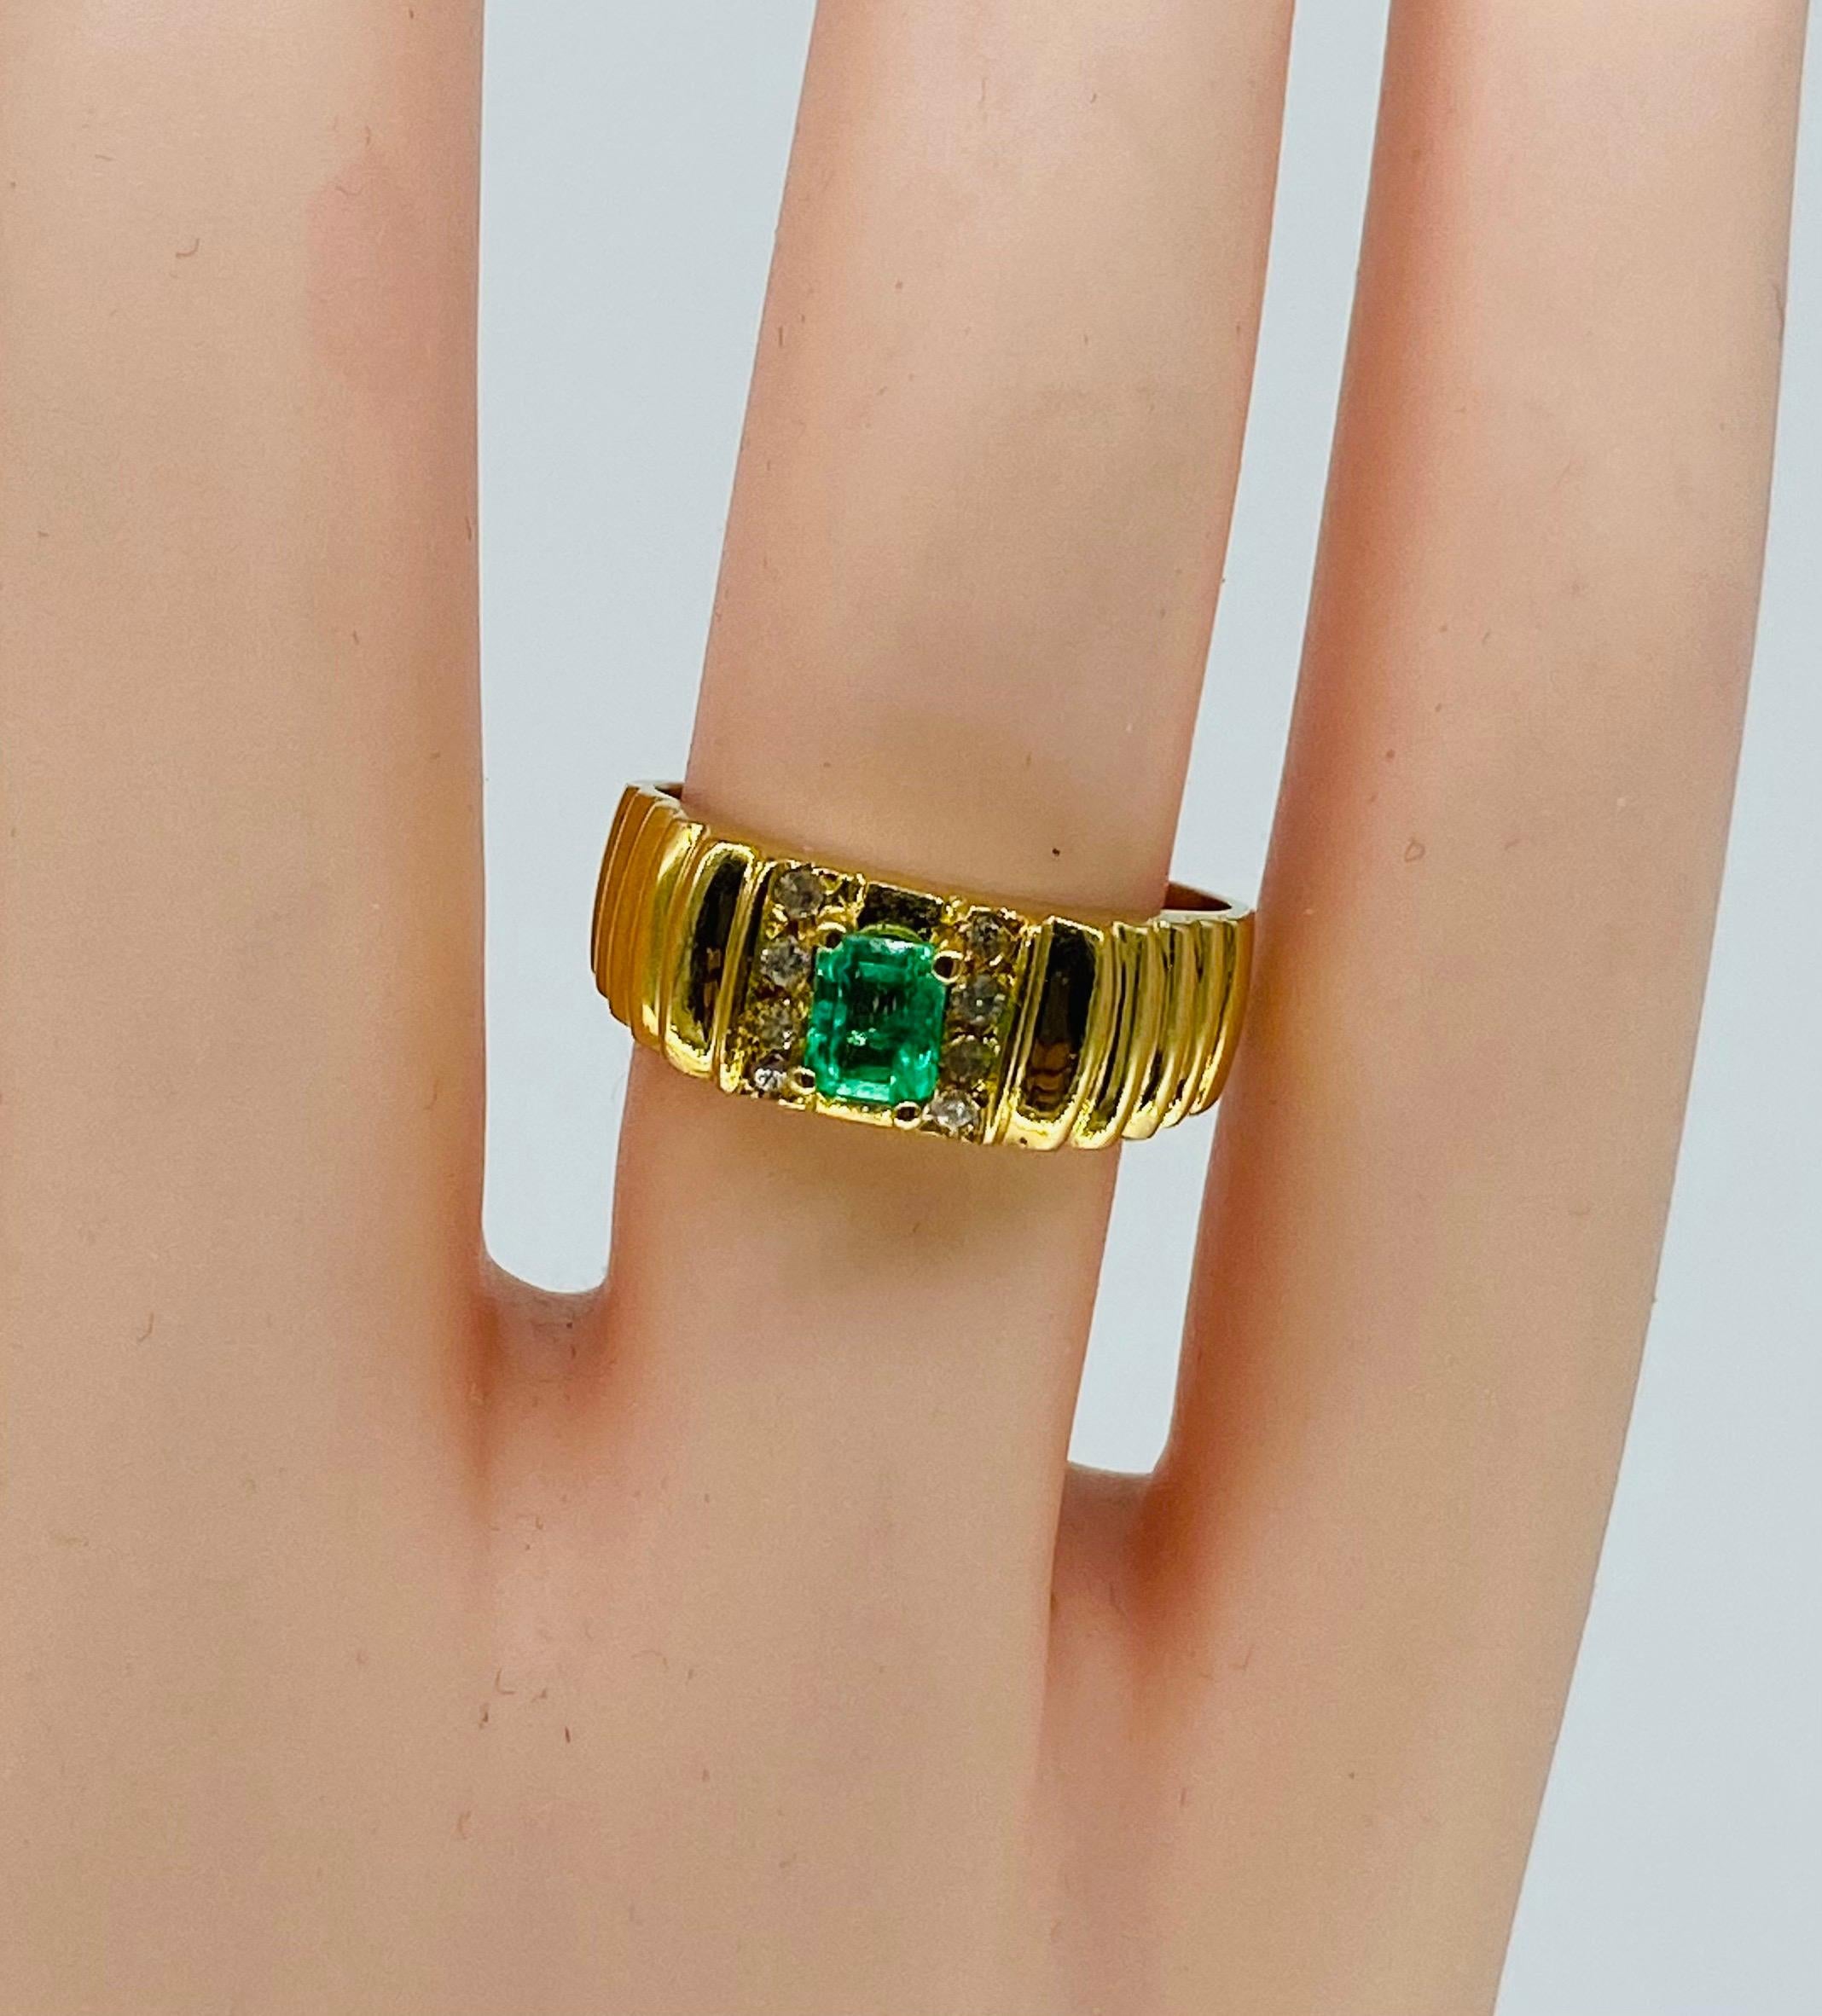 Vintage 0.50 Carat Colombian Emerald Ring 18k Gold In Excellent Condition For Sale In Miami, FL